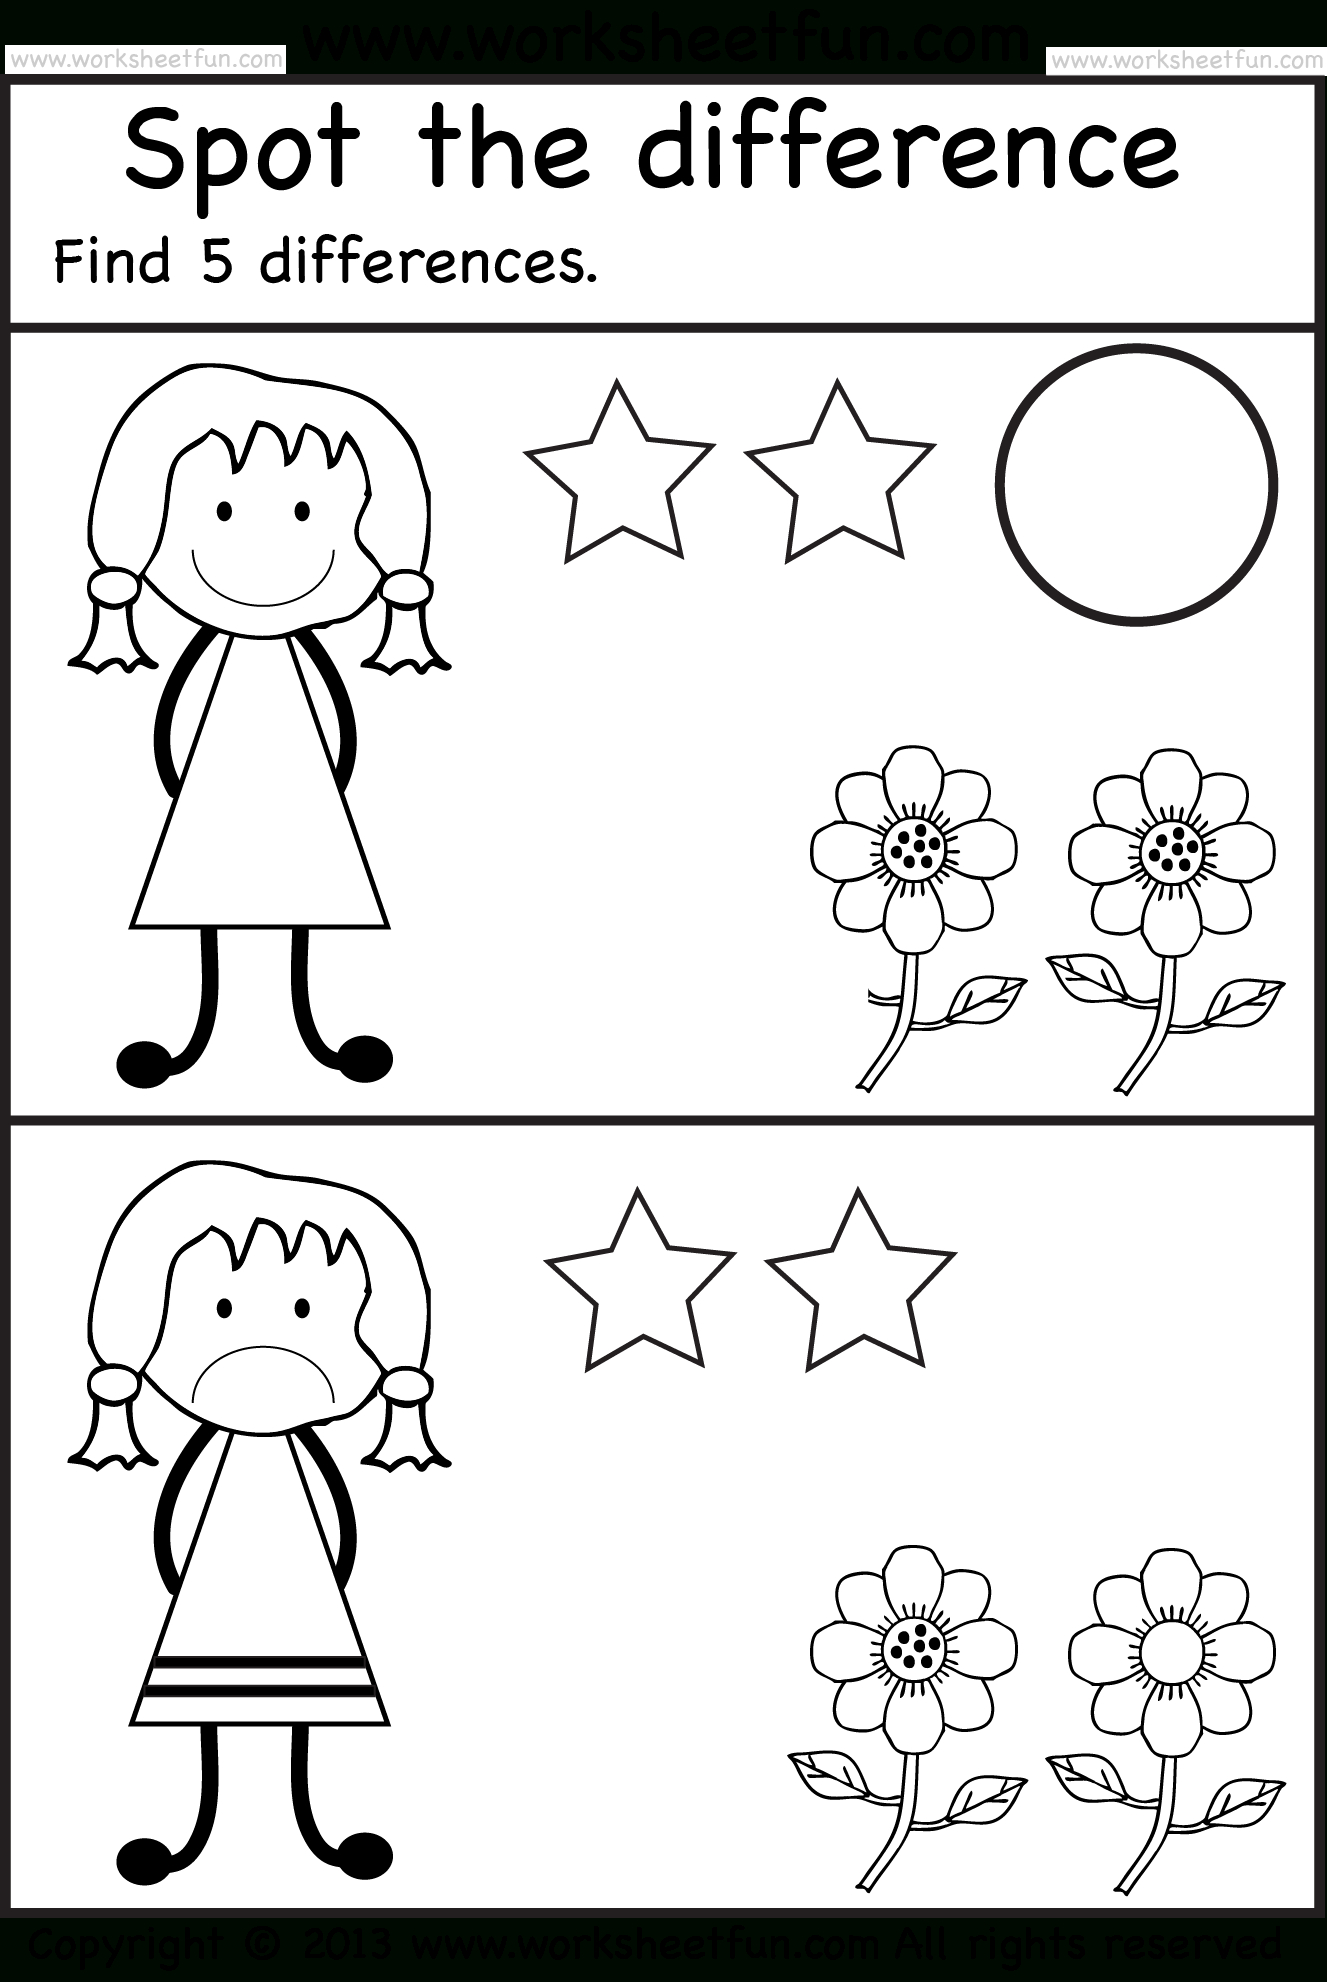 spot-the-differences-pre-k-activities-kindergarten-worksheets-free-printable-spot-the